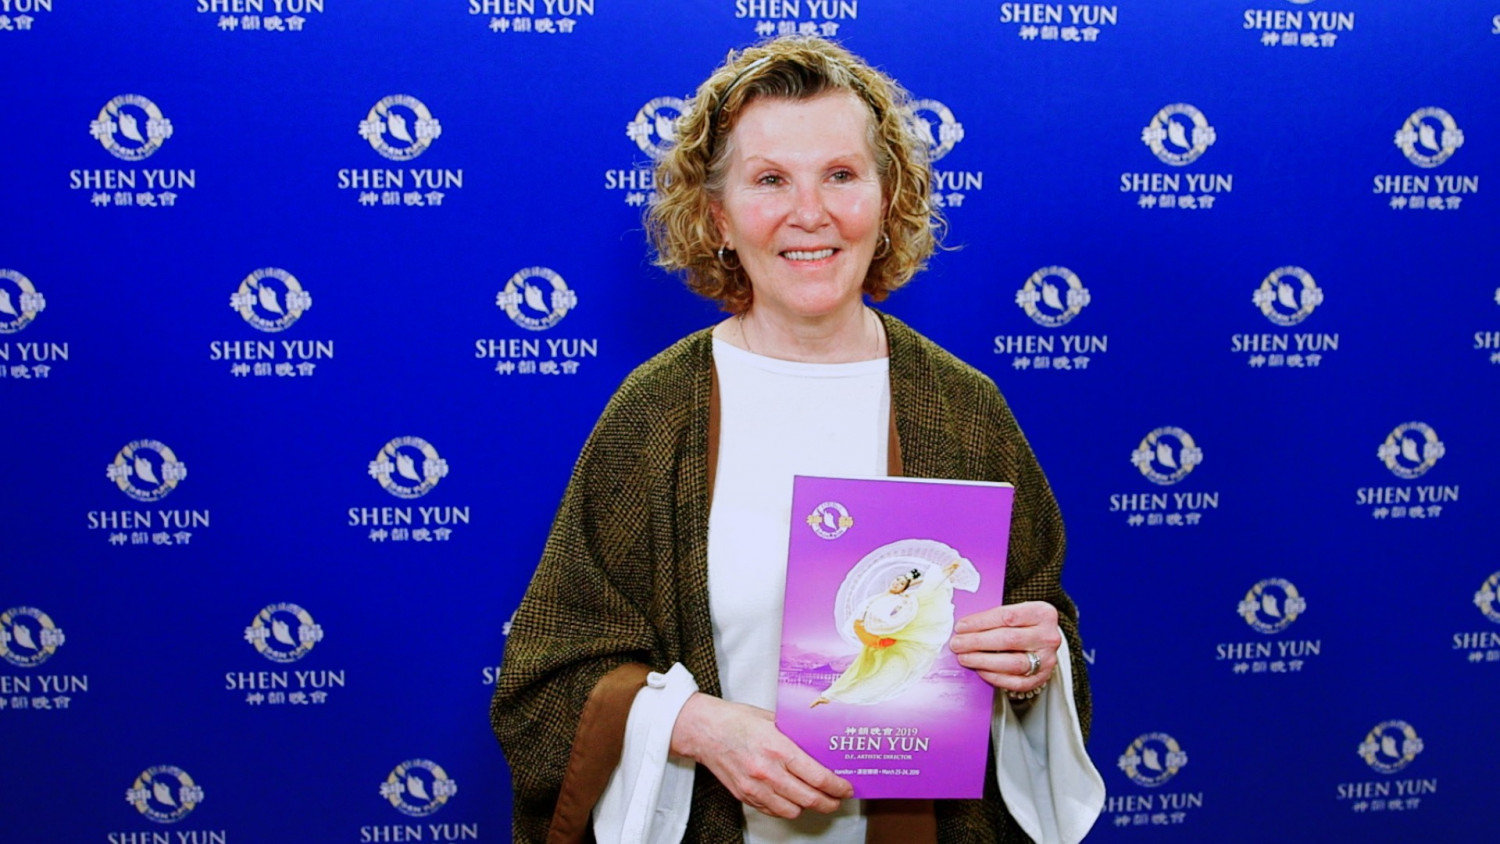 Shen Yun Brings the True Beauty of Humanity, Says CEO